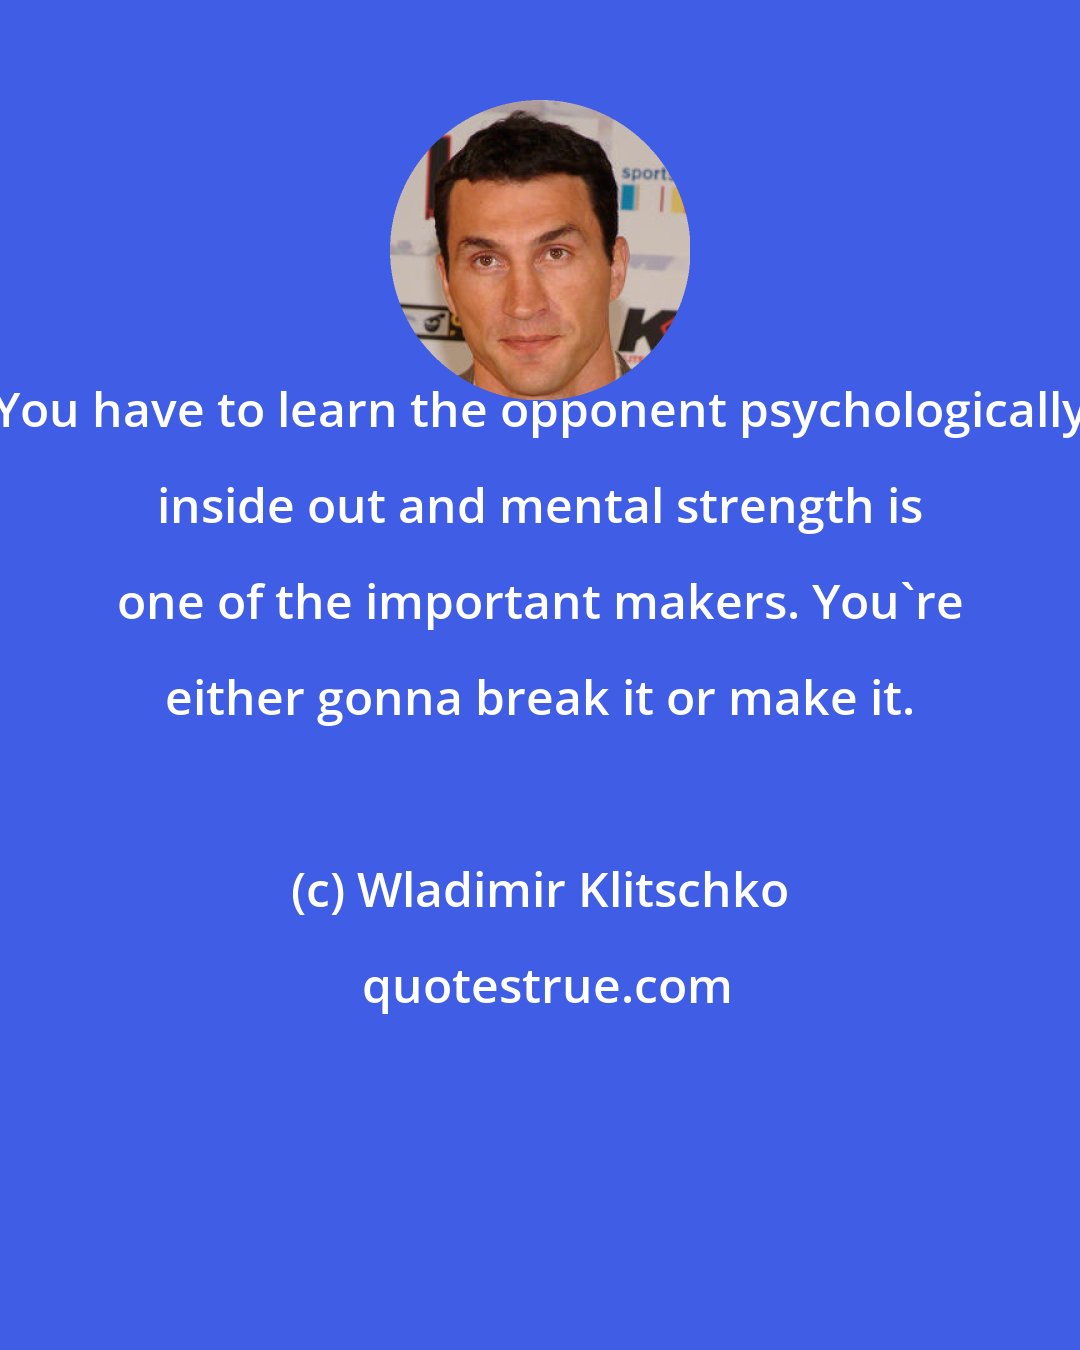 Wladimir Klitschko: You have to learn the opponent psychologically inside out and mental strength is one of the important makers. You're either gonna break it or make it.